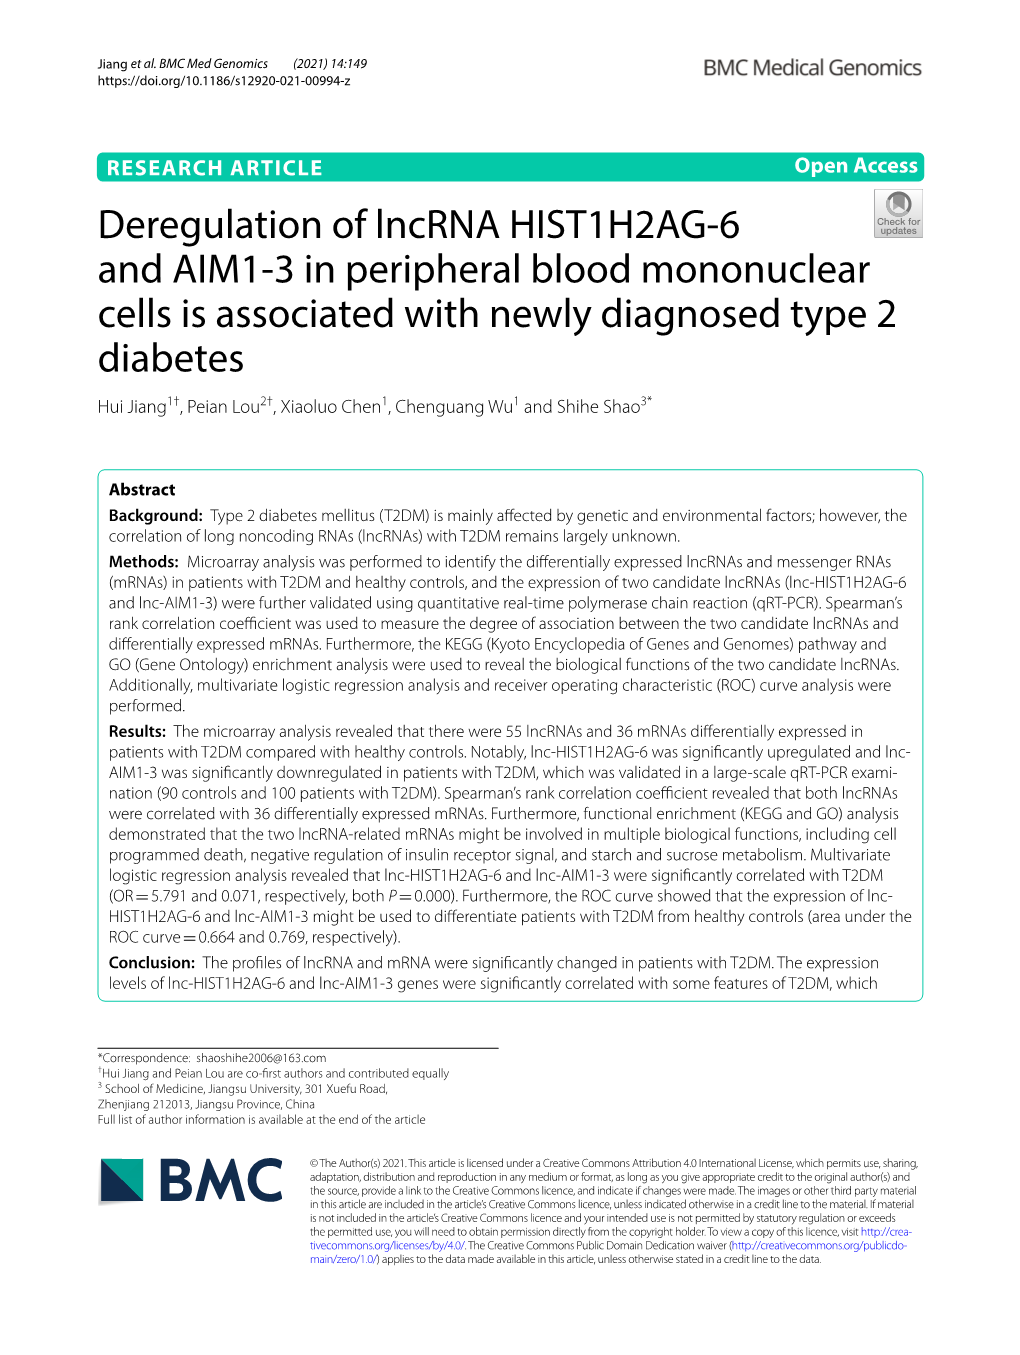 Deregulation of Lncrna HIST1H2AG-6 and AIM1-3 In